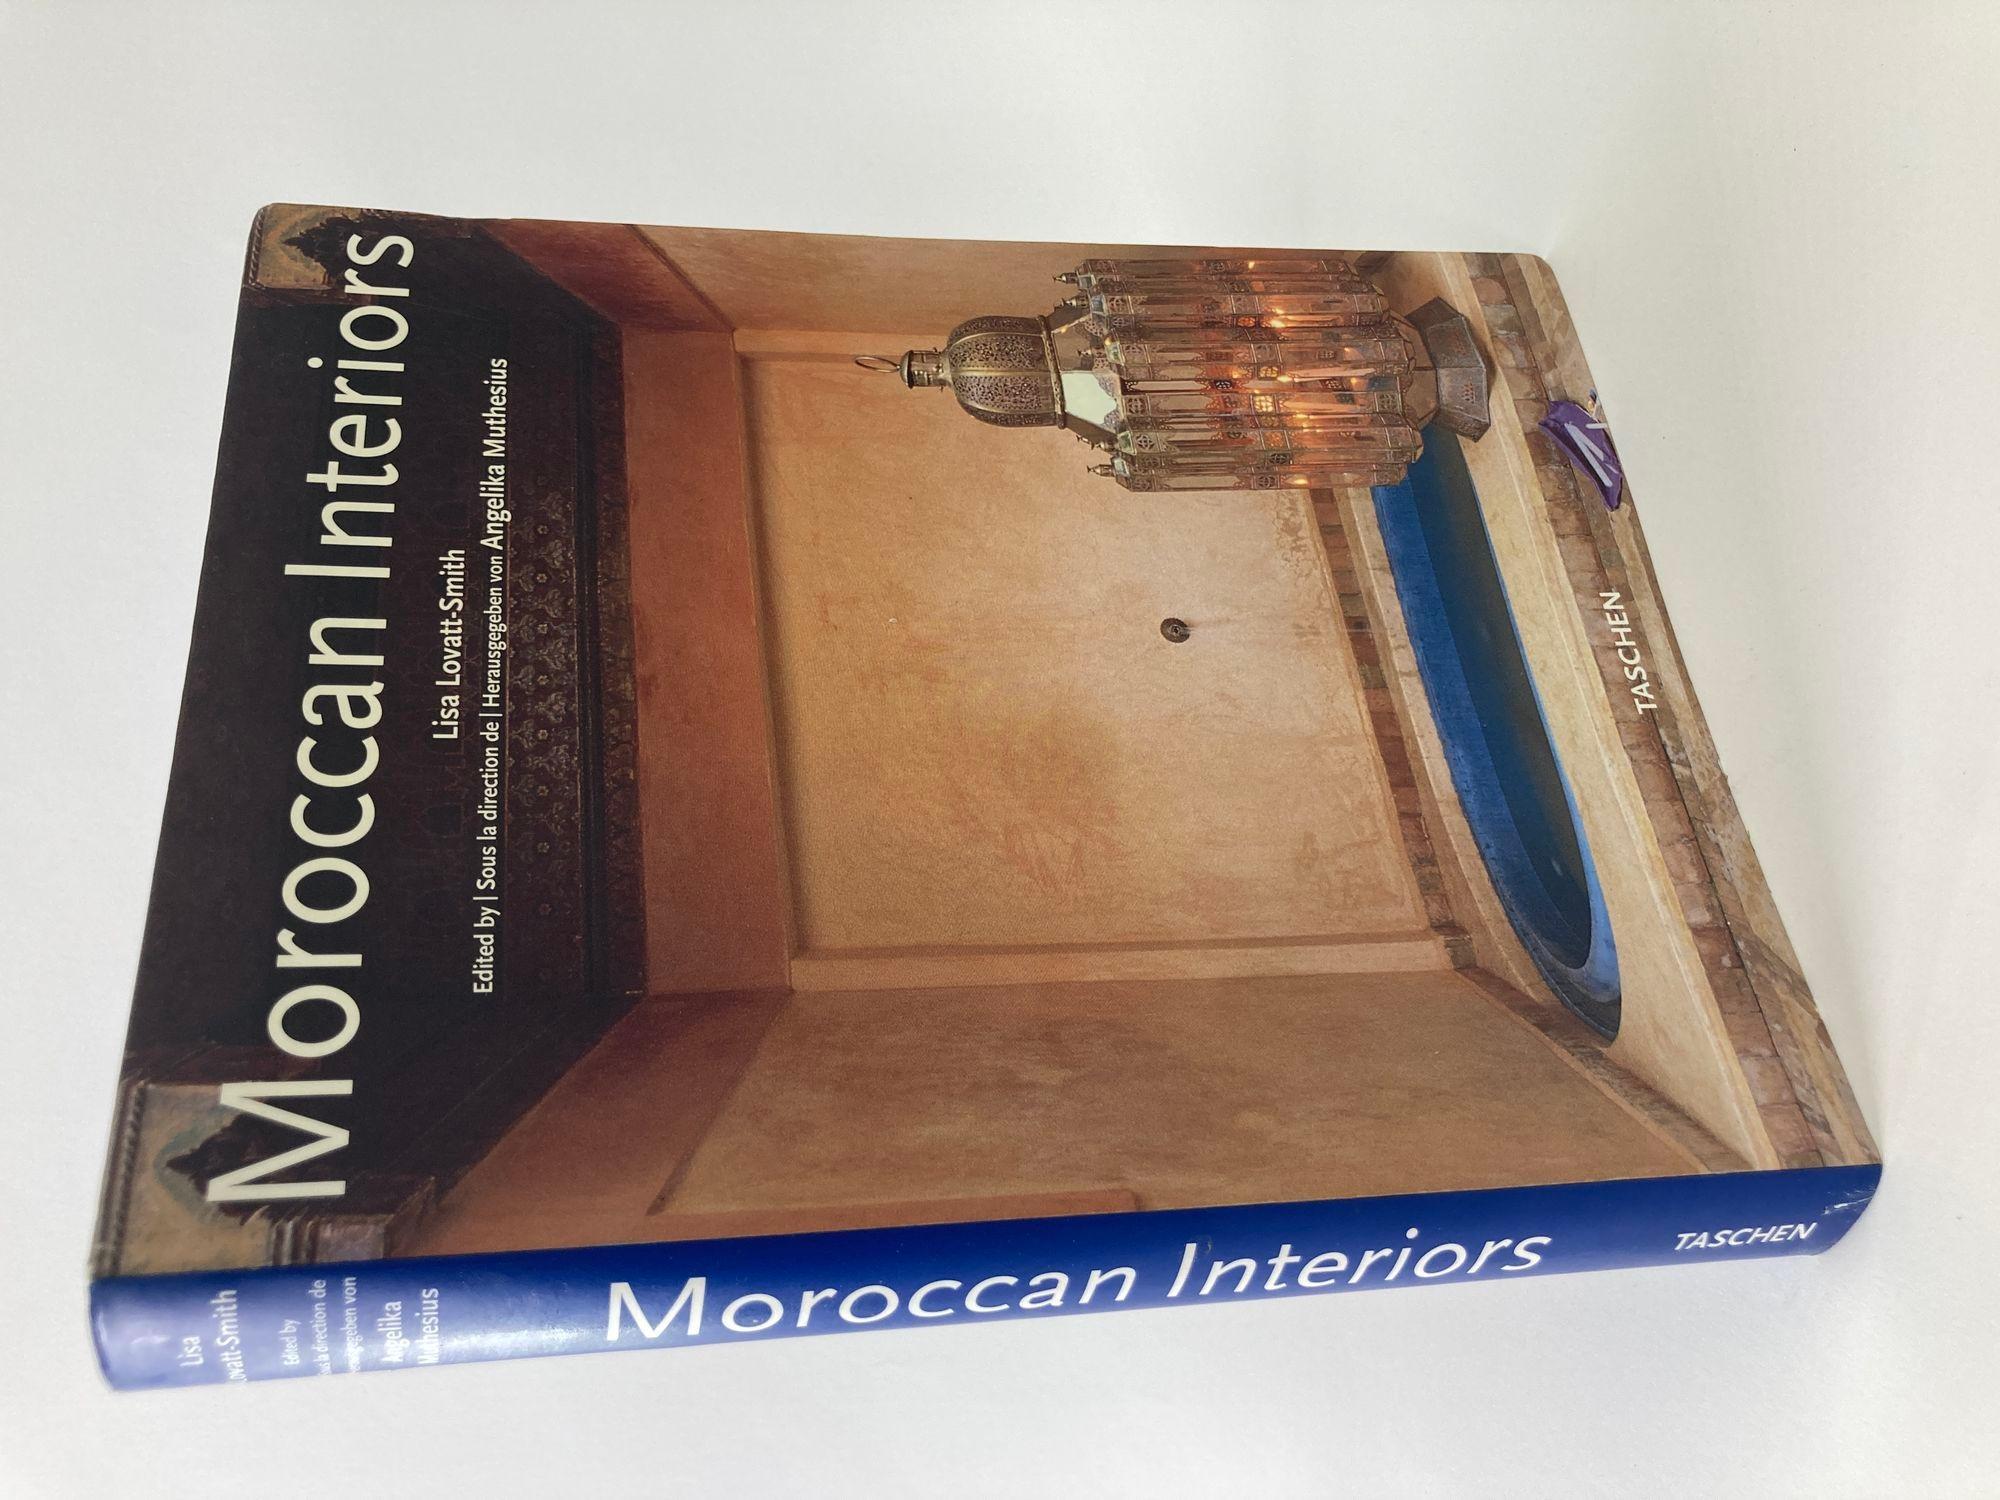 Moroccan Interiors Tashen Book by  Lisa Lovatt-Smith.
A temptation to dream This book explores contemporary interiors in the sun-soaked land that stretches from the Sahara to the Mediterranean: Morocco. The diversity is breathtaking: the rural pis?